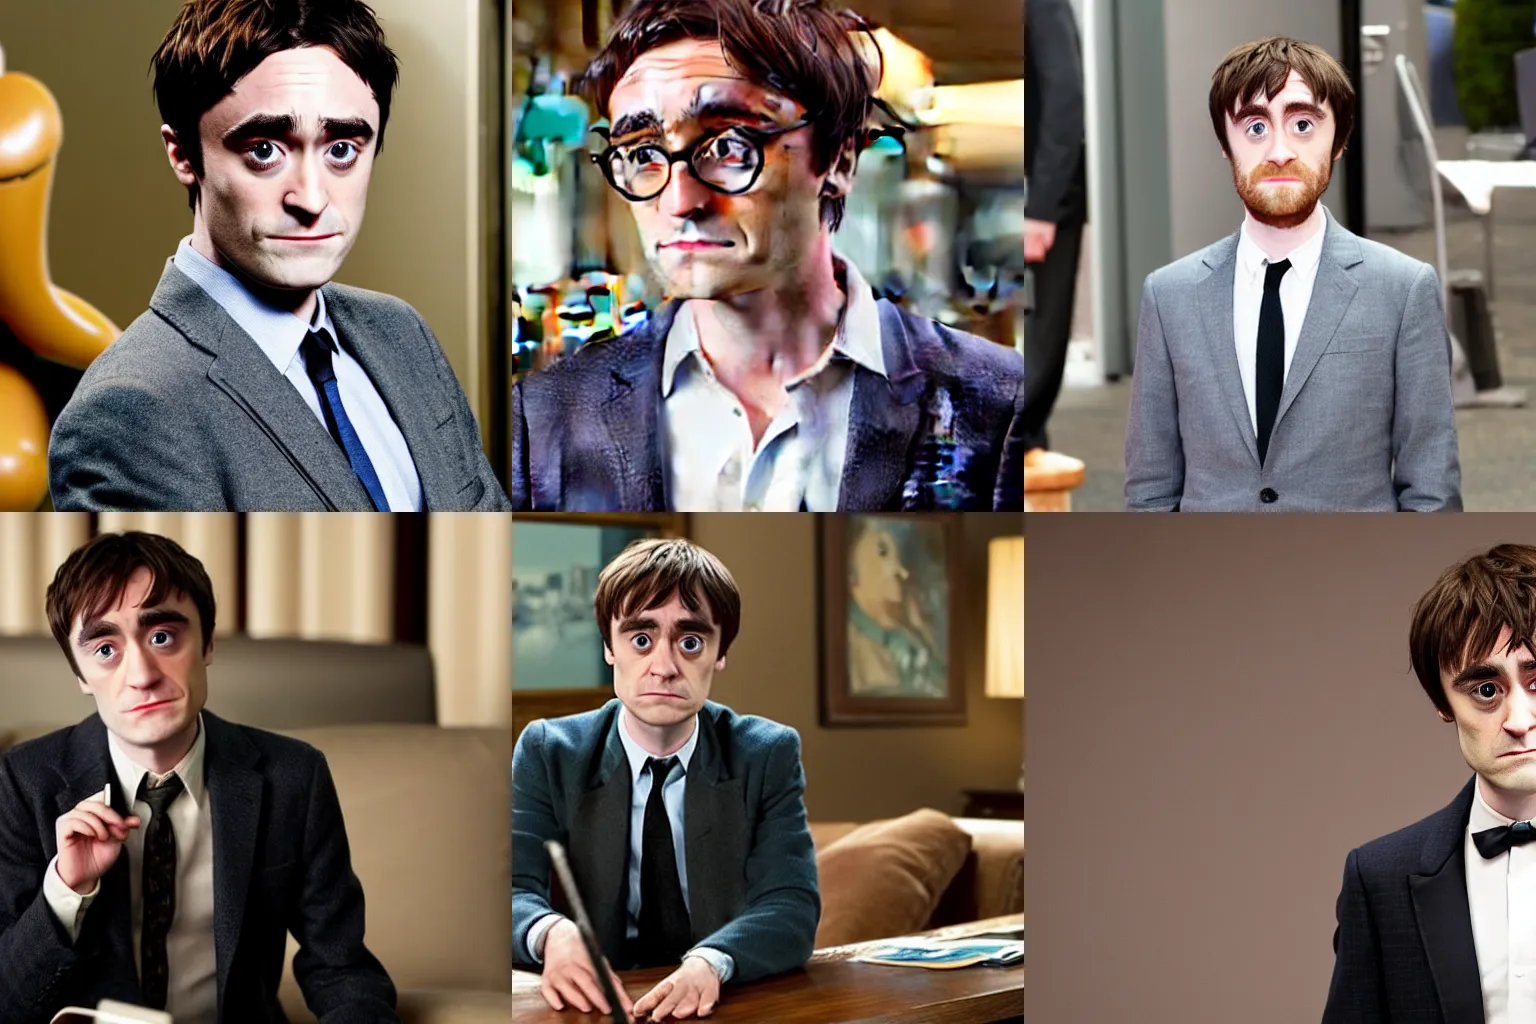 Prompt: the Actor Daniel radcliff playing the role of a Rich business man in a Pixar movie